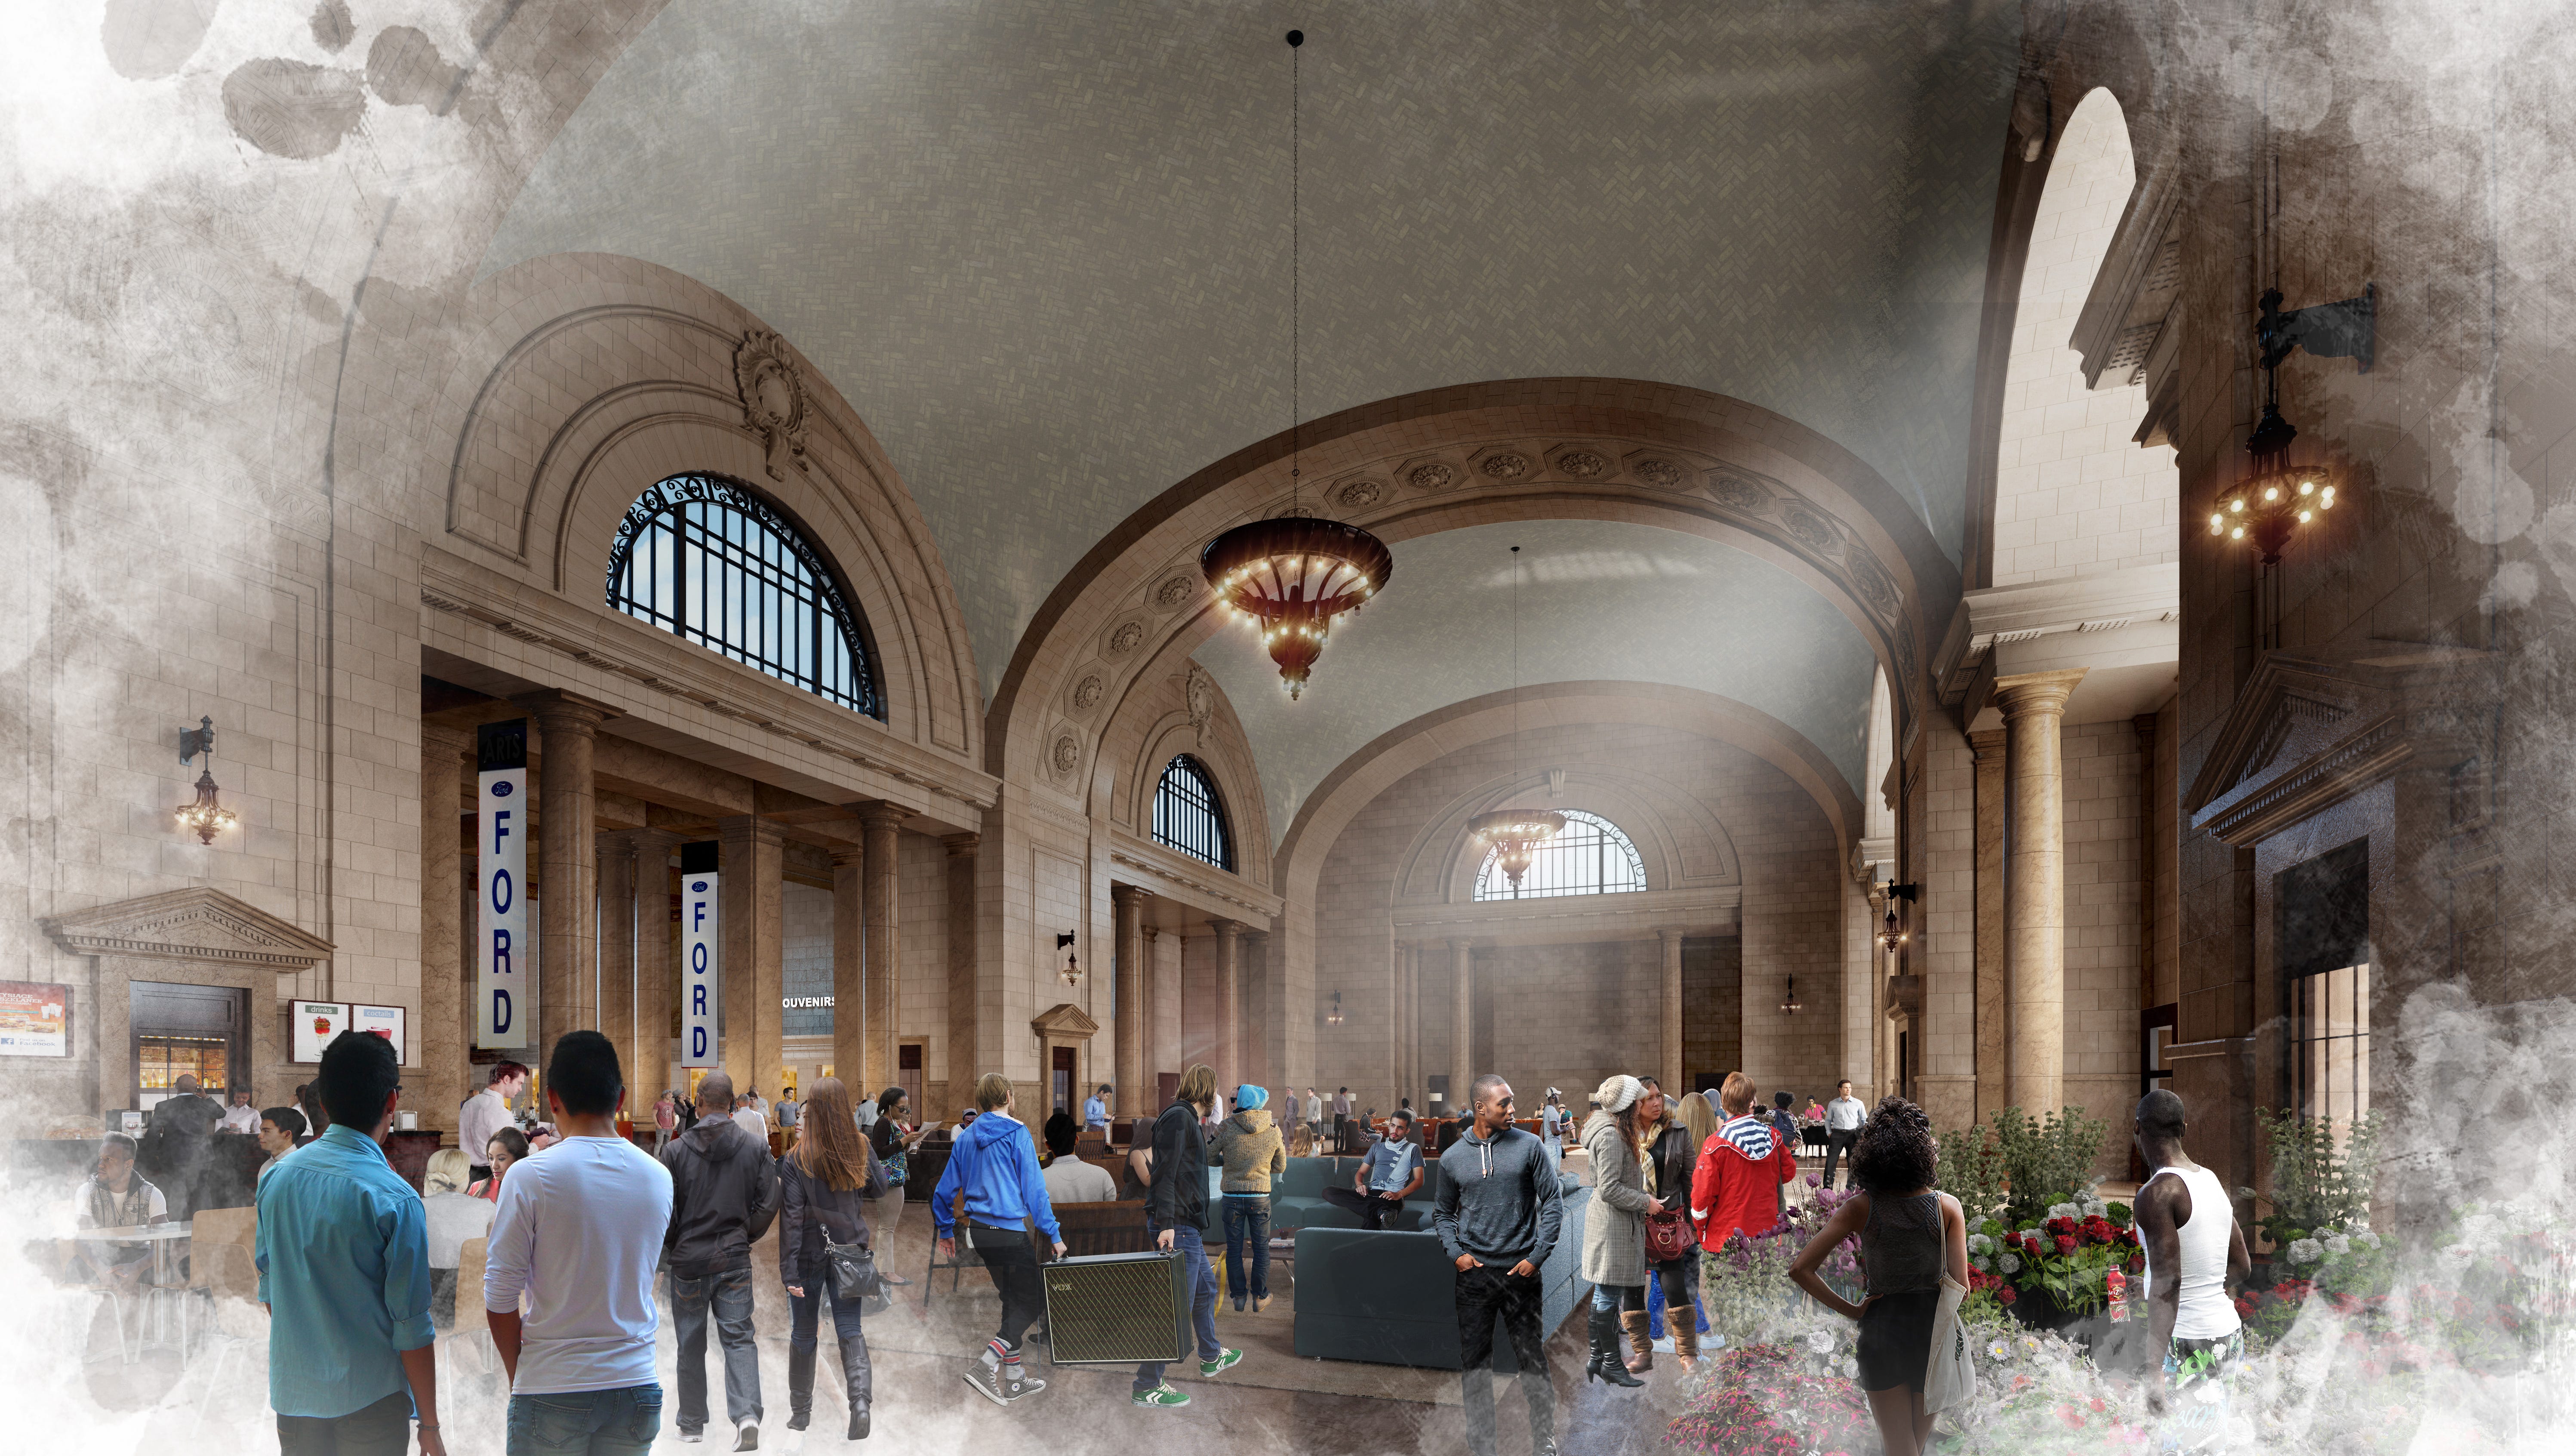 A rendering imagines the ground floor of the old Michigan Central Depot as a public space with retail, restaurants and gathering spaces.